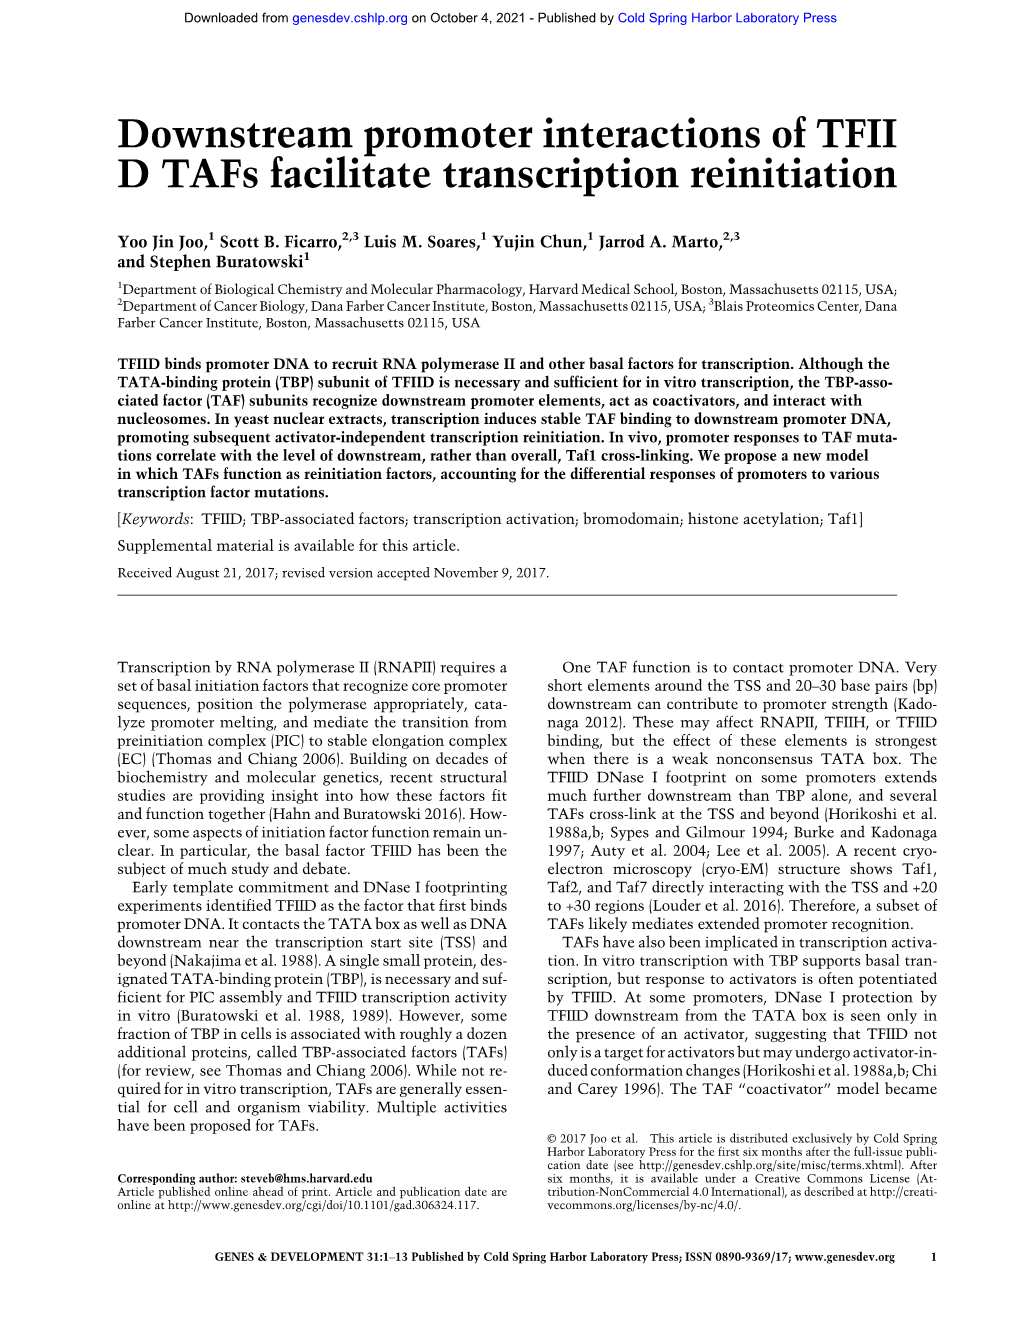 Downstream Promoter Interactions of TFIID Tafs Facilitate Transcription Reinitiation